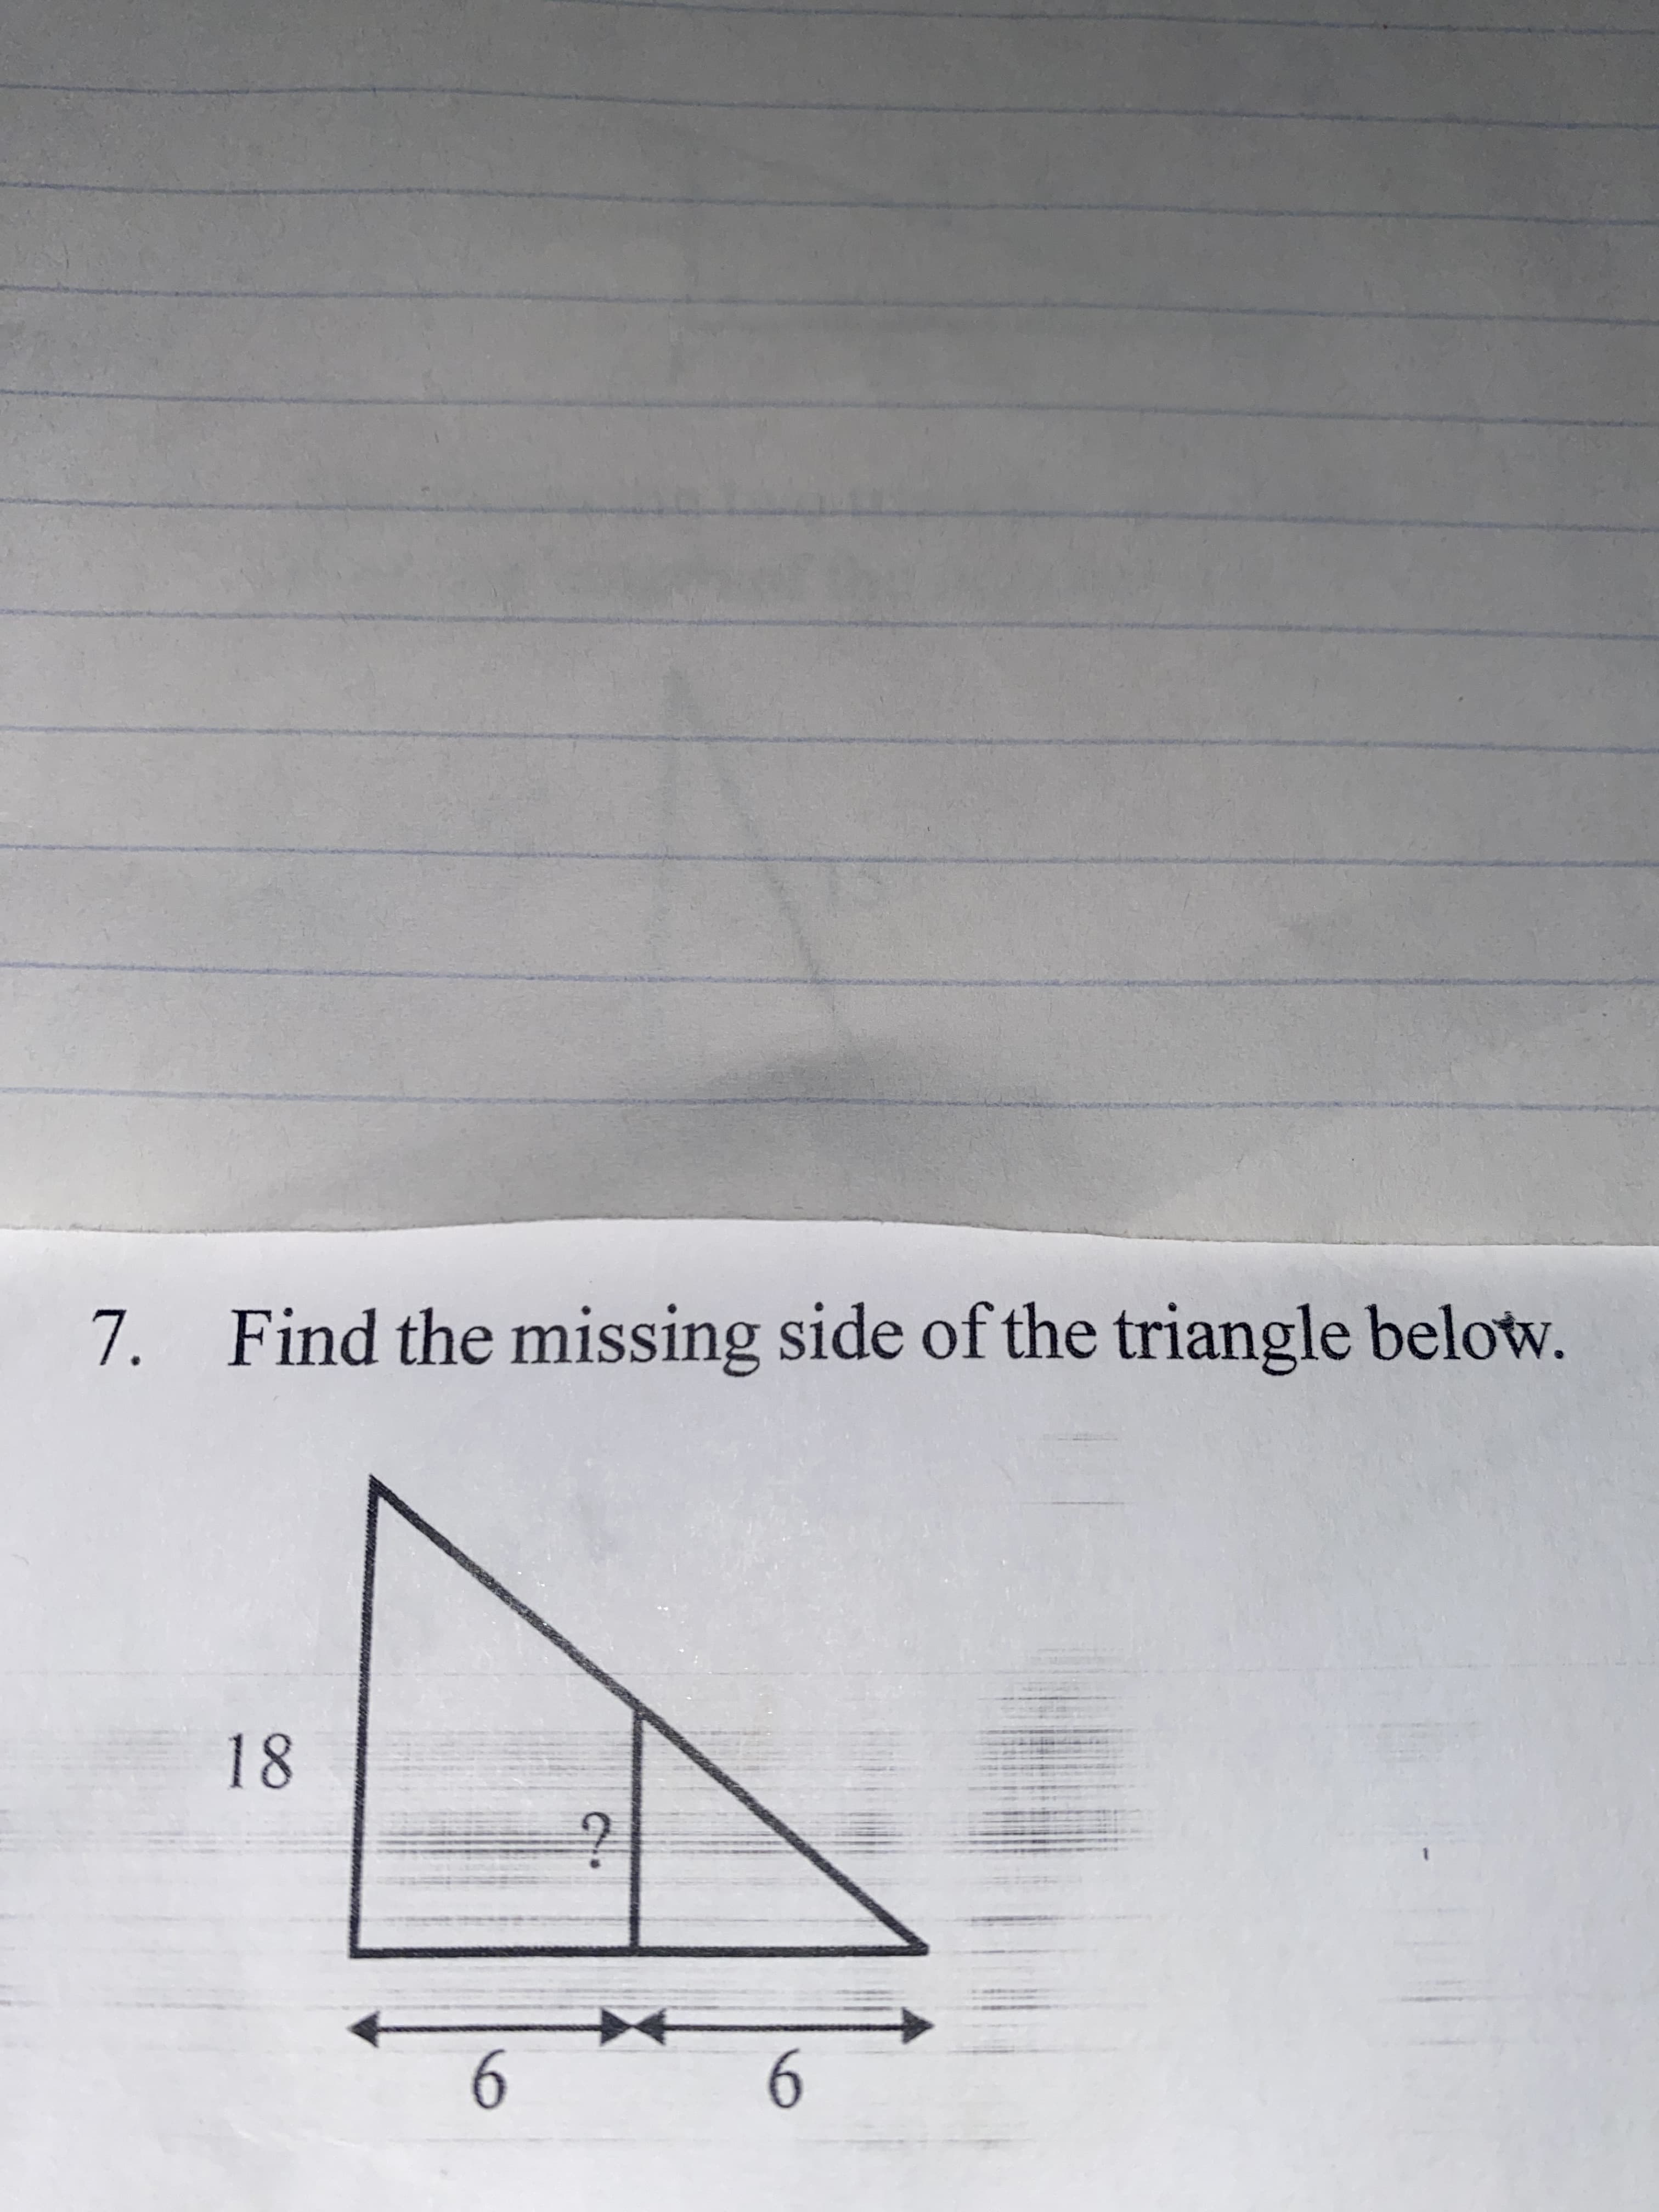 9.
9.
88
7. Find the missing side of the triangle below.
